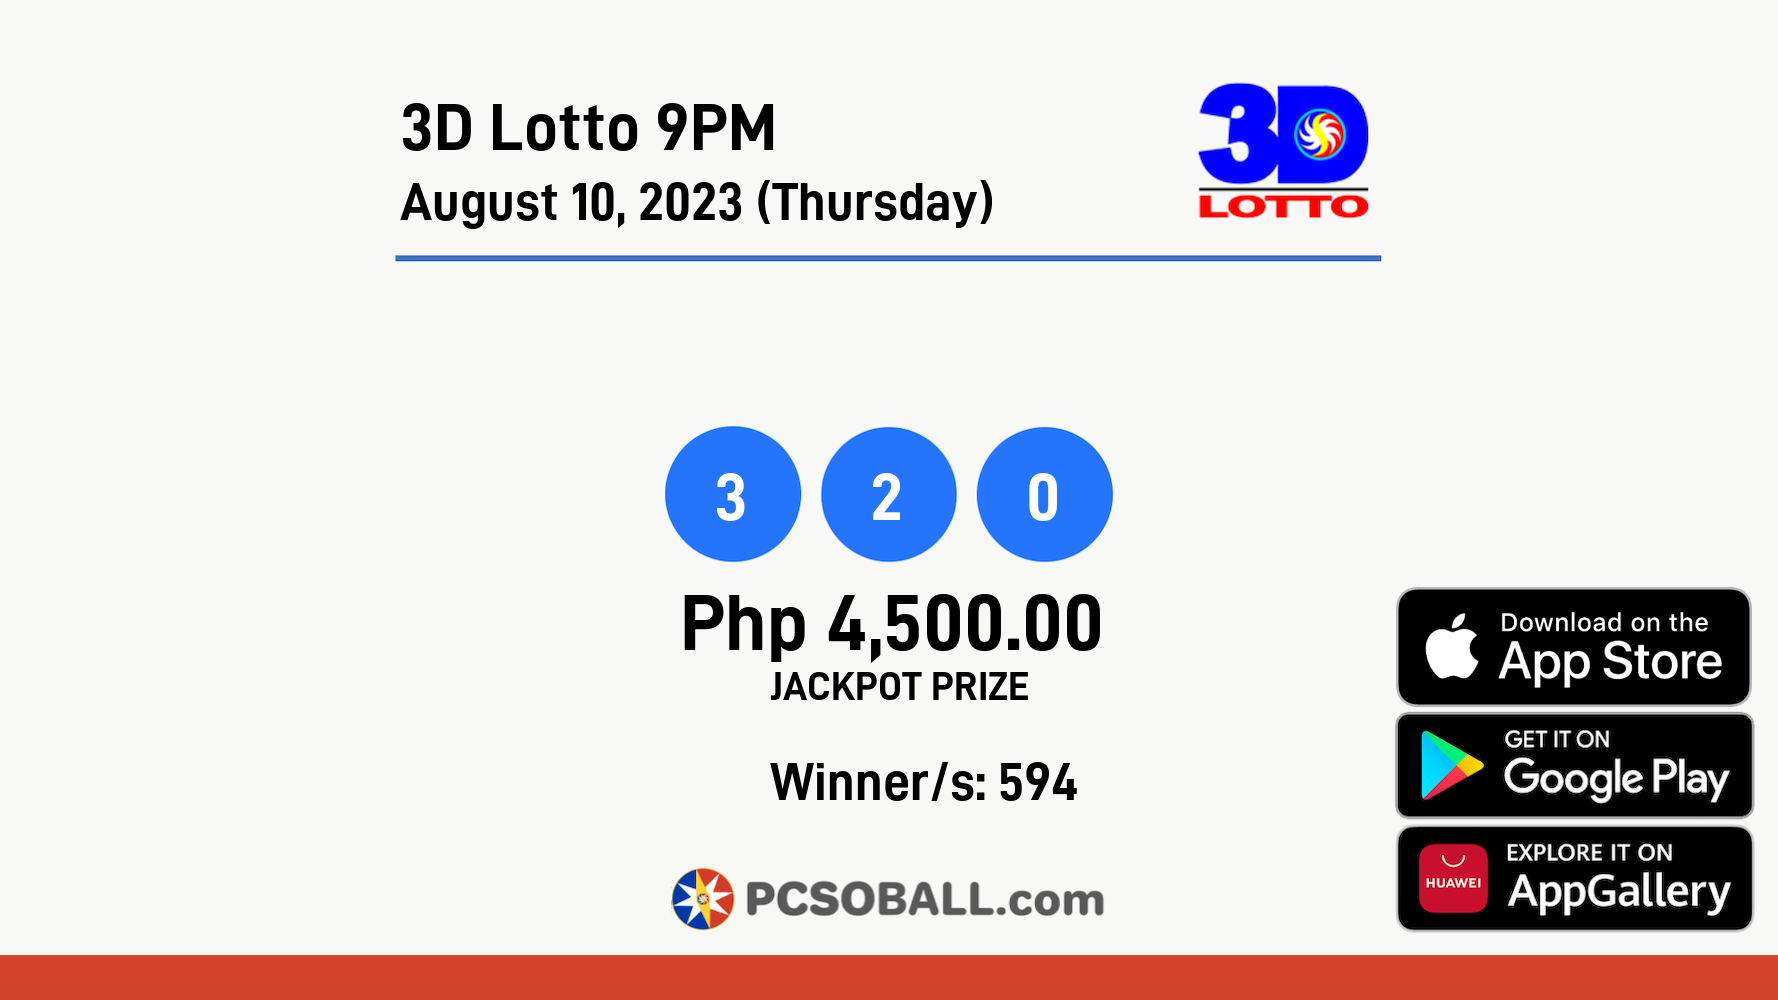 3D Lotto 9PM August 10, 2023 (Thursday) Result